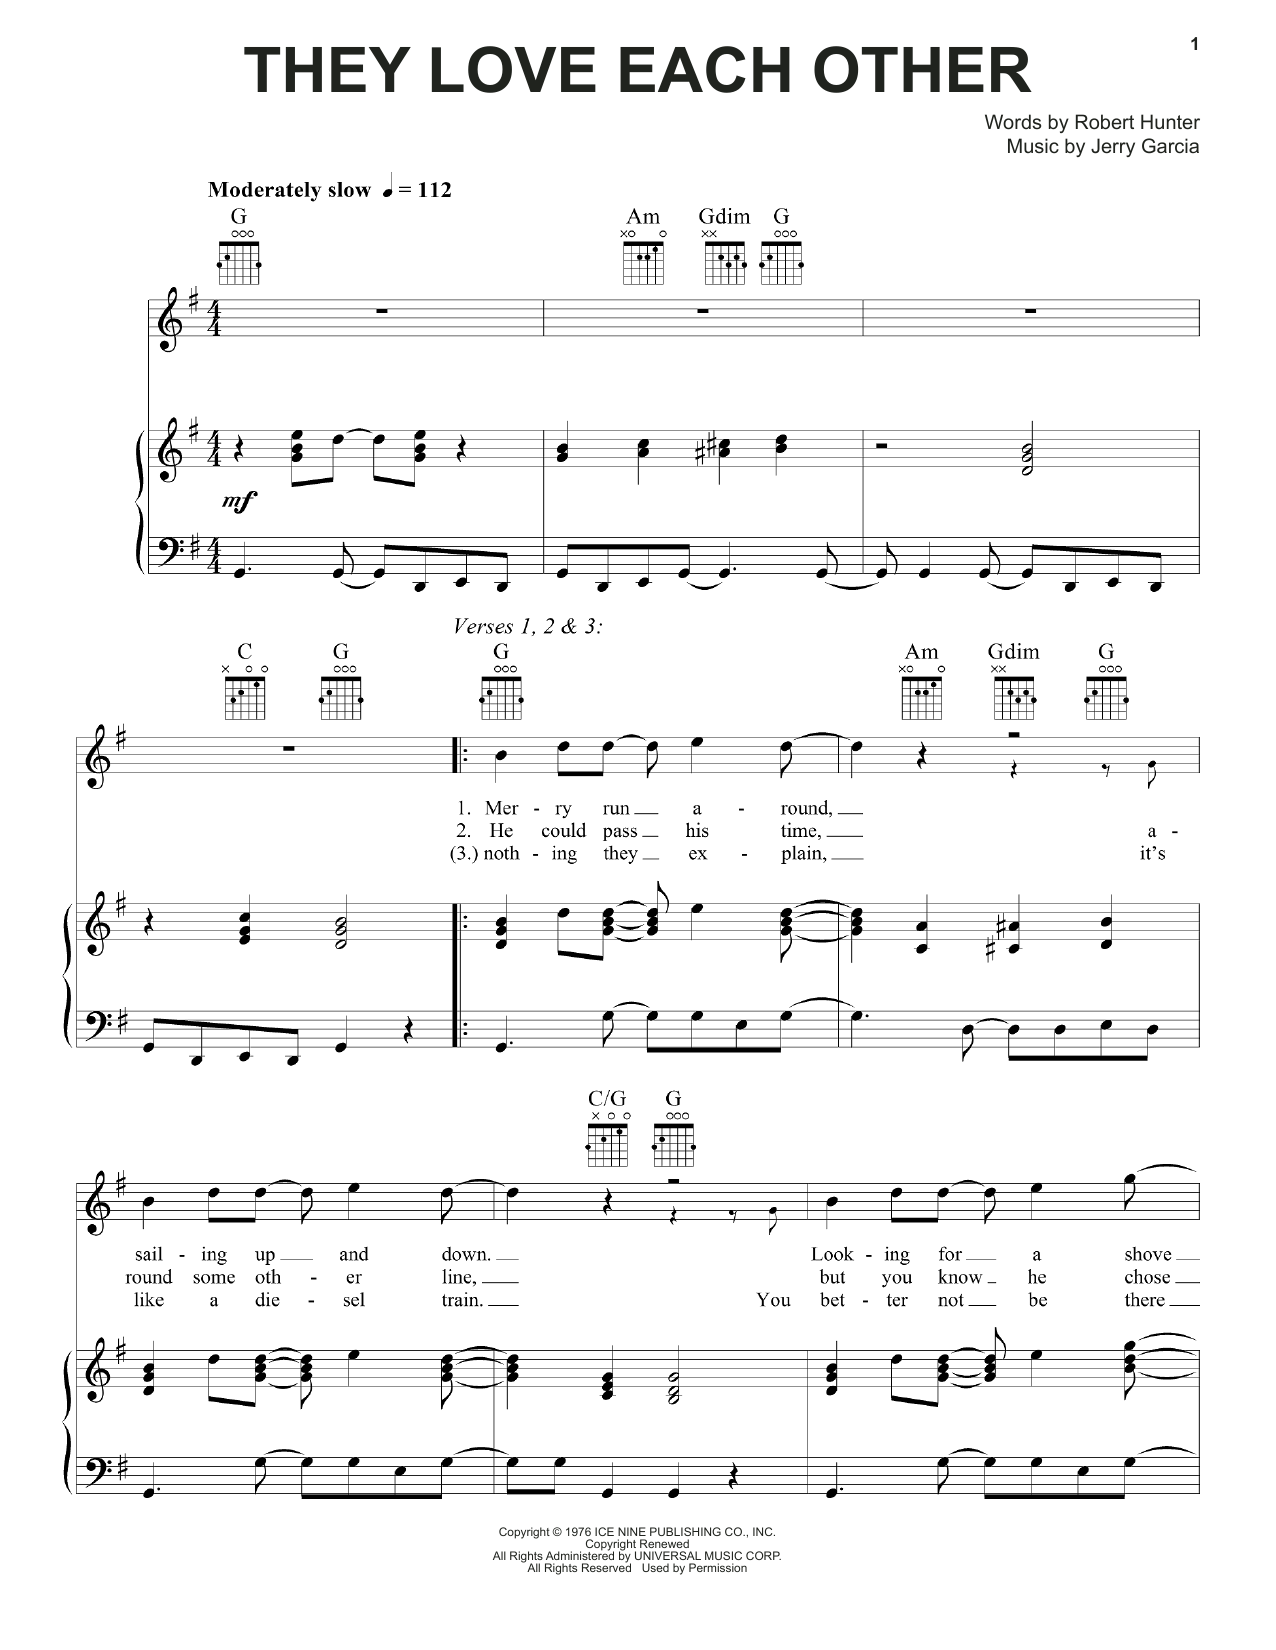 Download Grateful Dead They Love Each Other Sheet Music